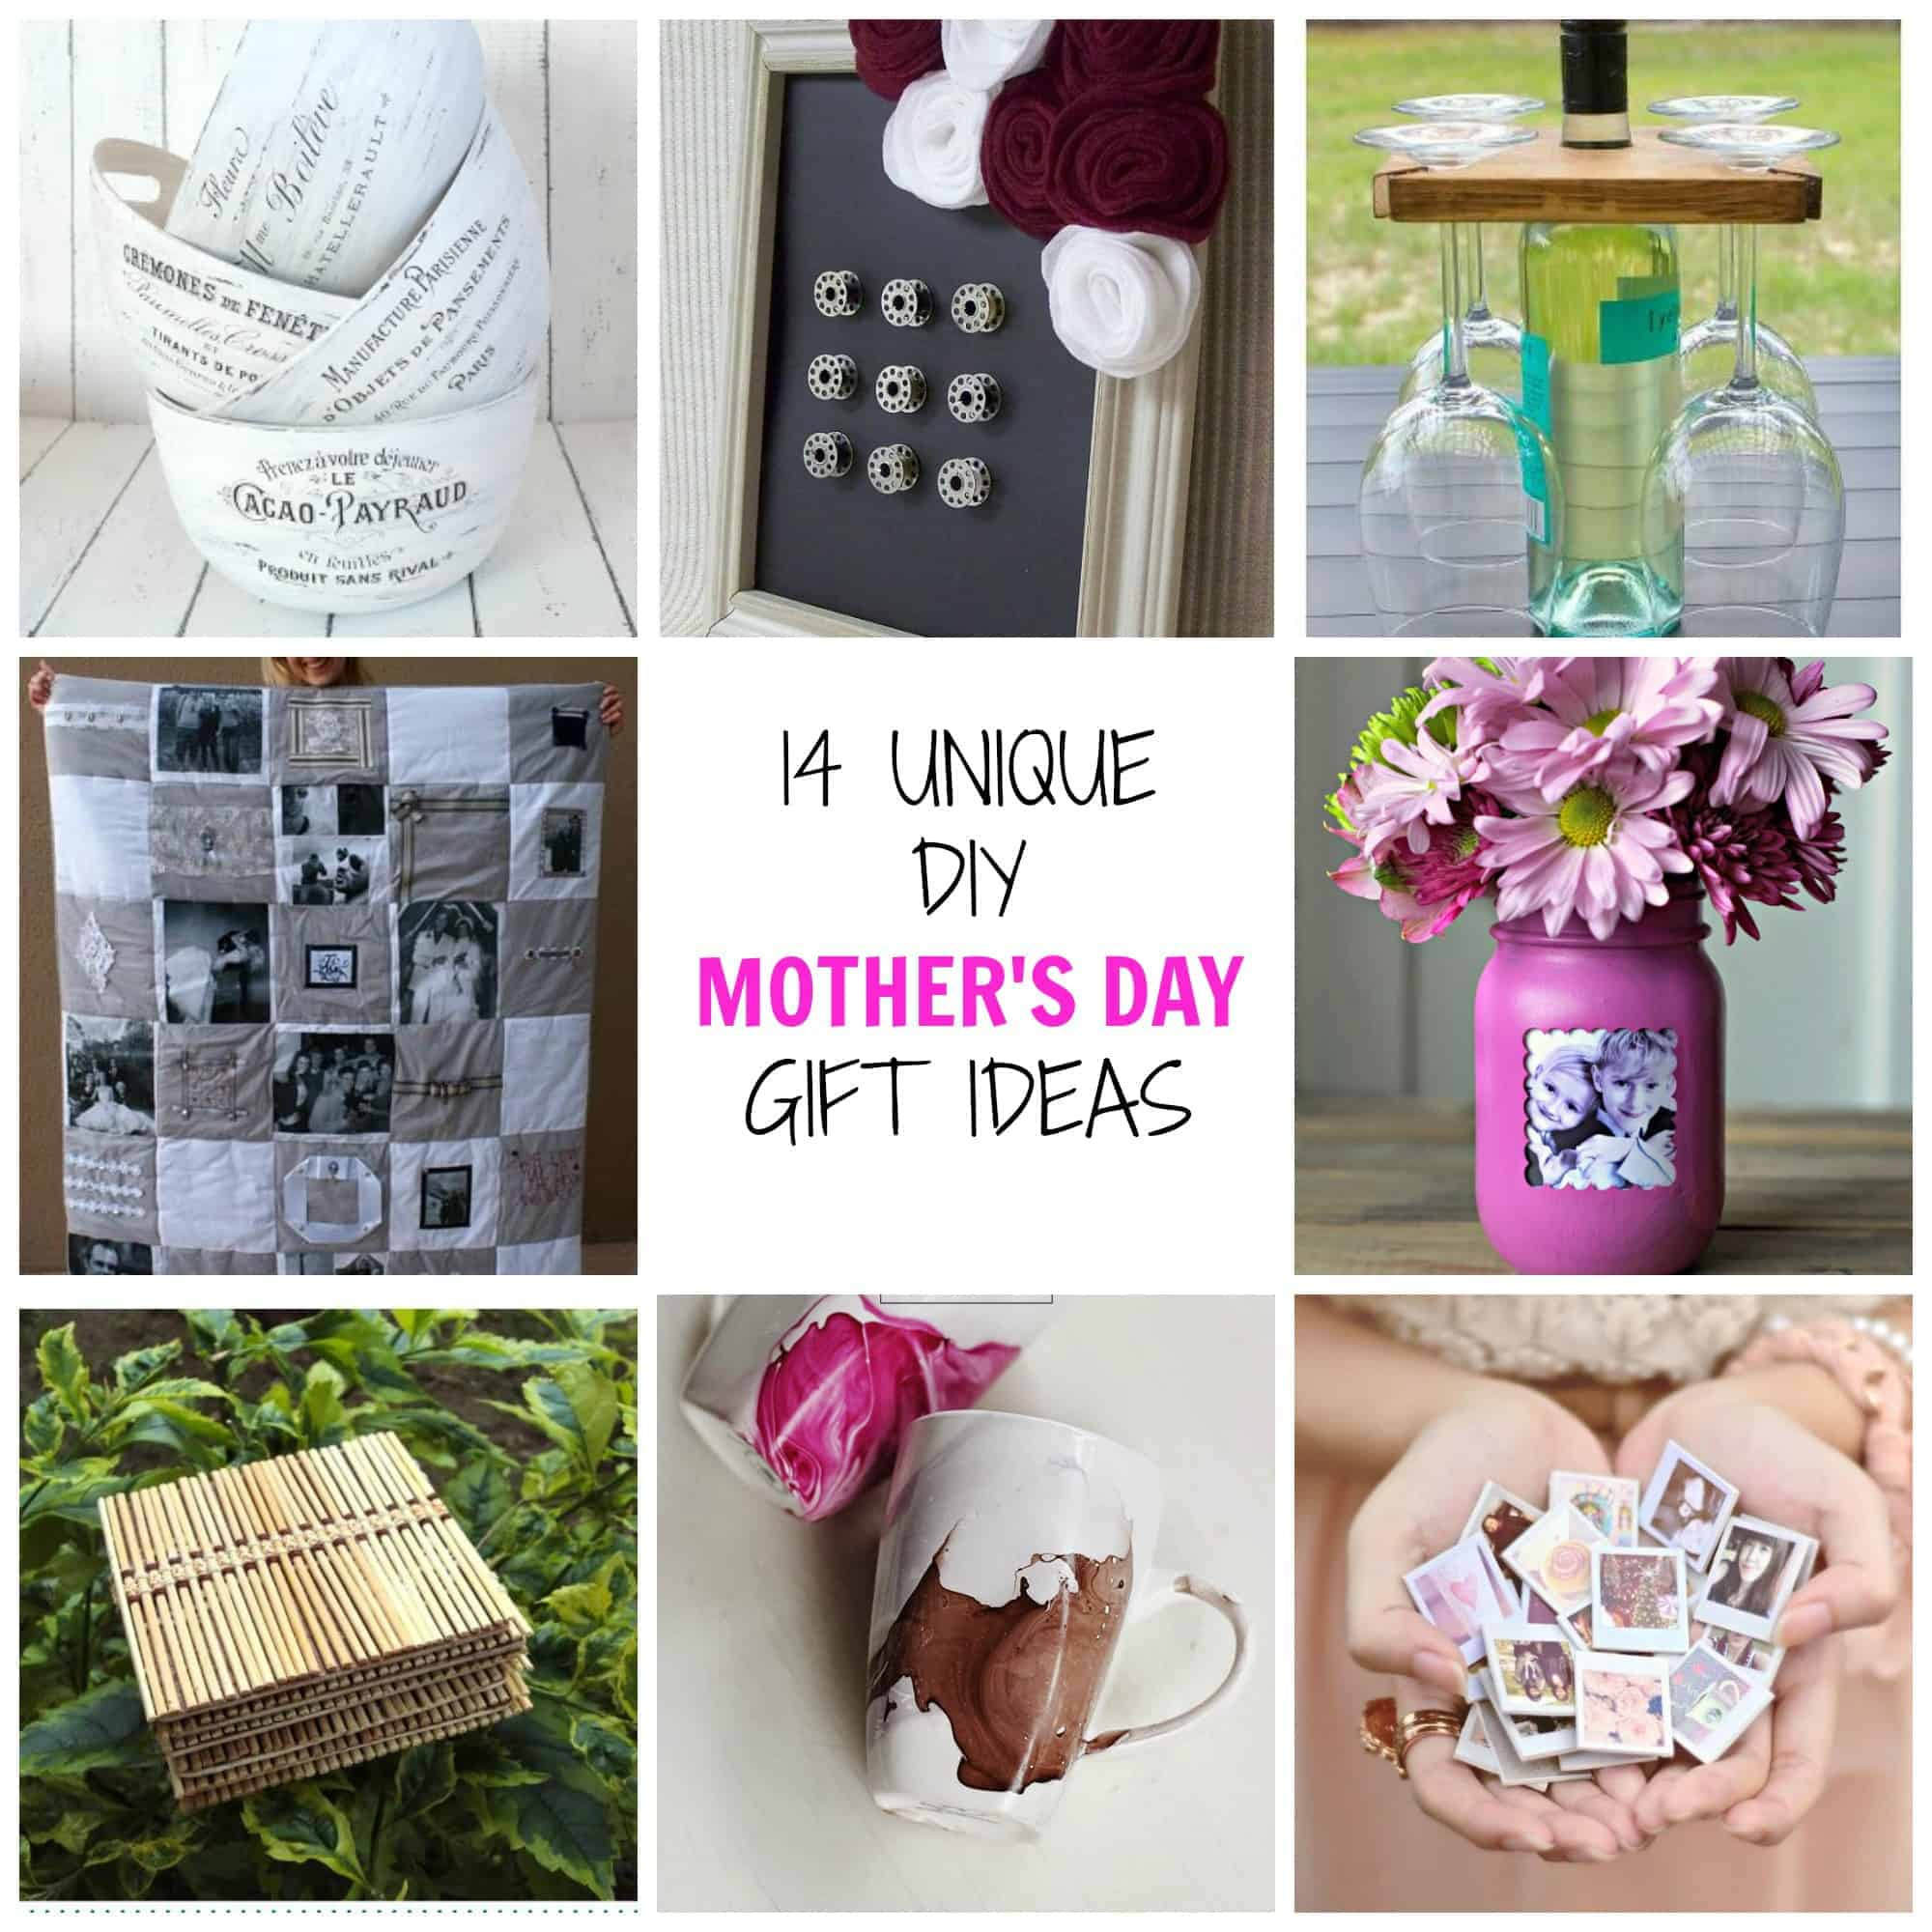 DIY Unique Gifts
 14 Unique DIY Mother s Day Gifts Simplify Create Inspire